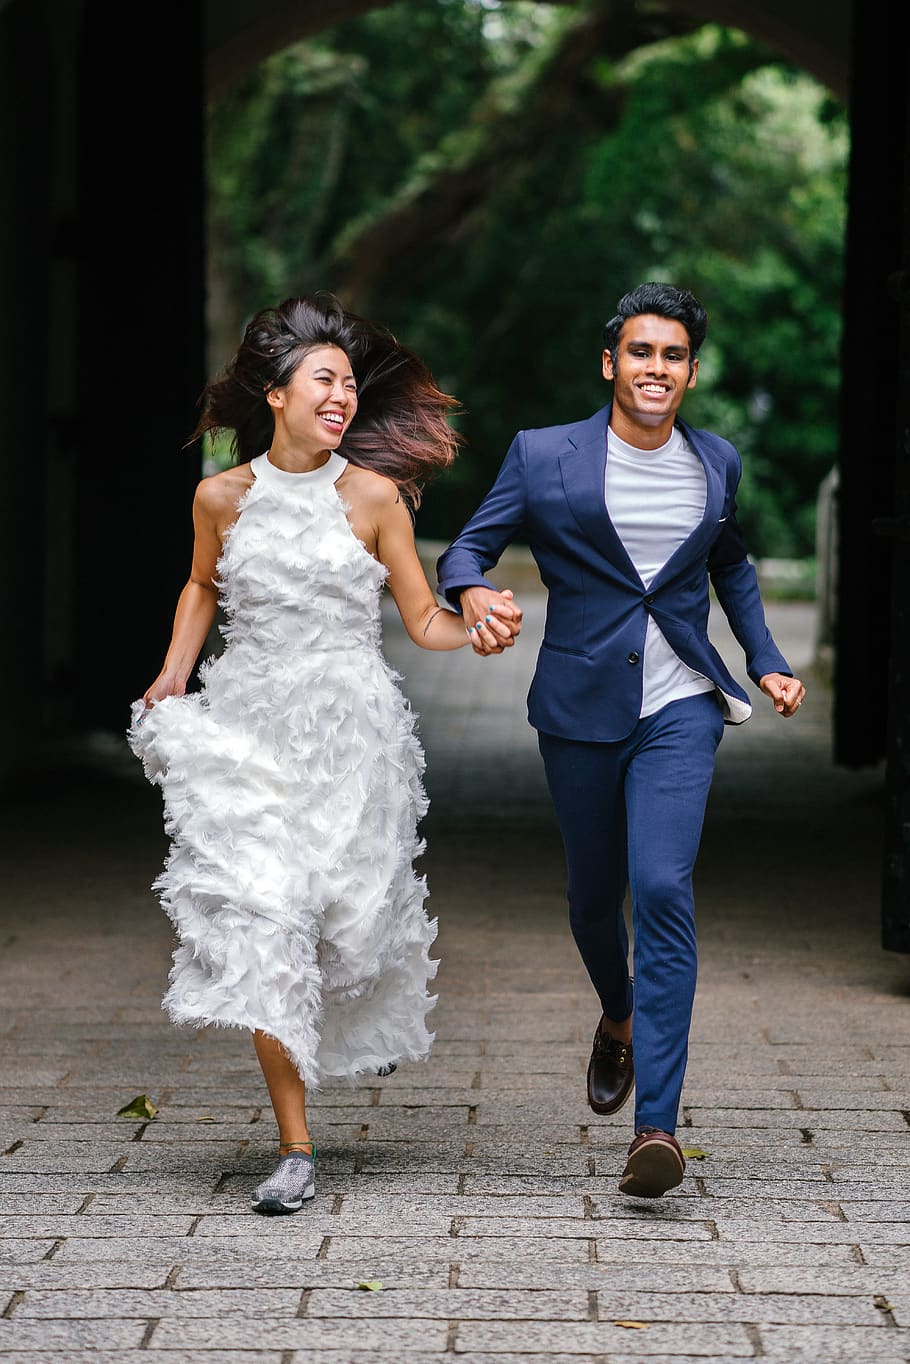 Bride and Groom Running on Concrete Pathway, Asian, Chinese, couple